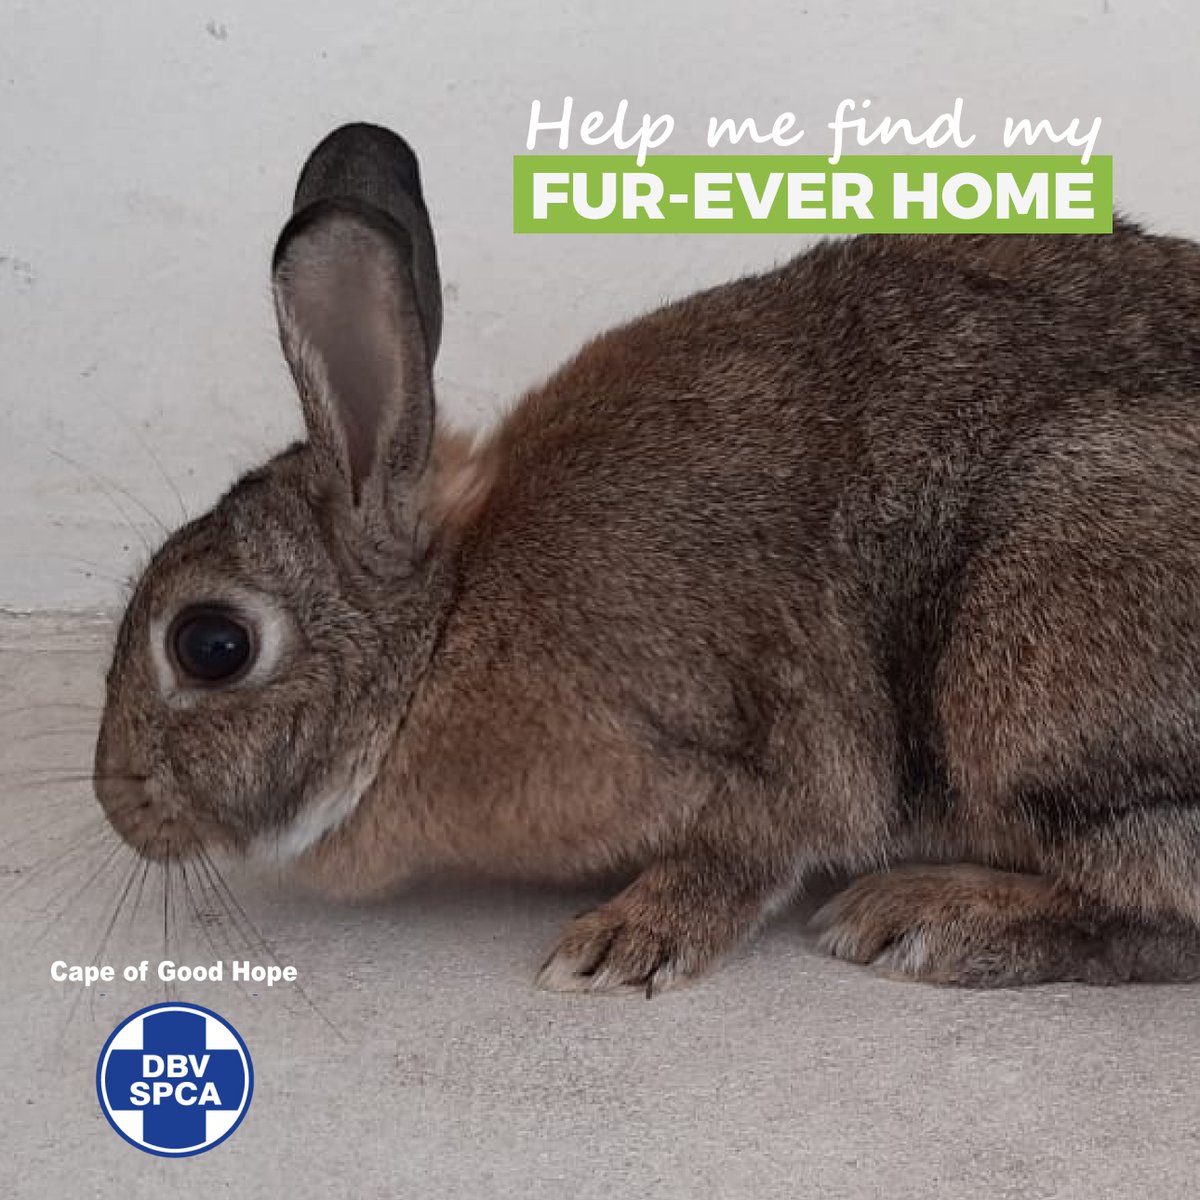 *ADOPTIONS* 🐰 RABBIT OF THE DAY 🐇 Meet Radish, a tri-color adult rabbit looking for her forever home. 👇 capespca.co.za/adoptions-news… #adoptdontshop #adopt #adoptionjourney #rabbit #adoptionislove #adoptionrocks #adoptarabbit #adoptme #pets #spca #capespca #capetown